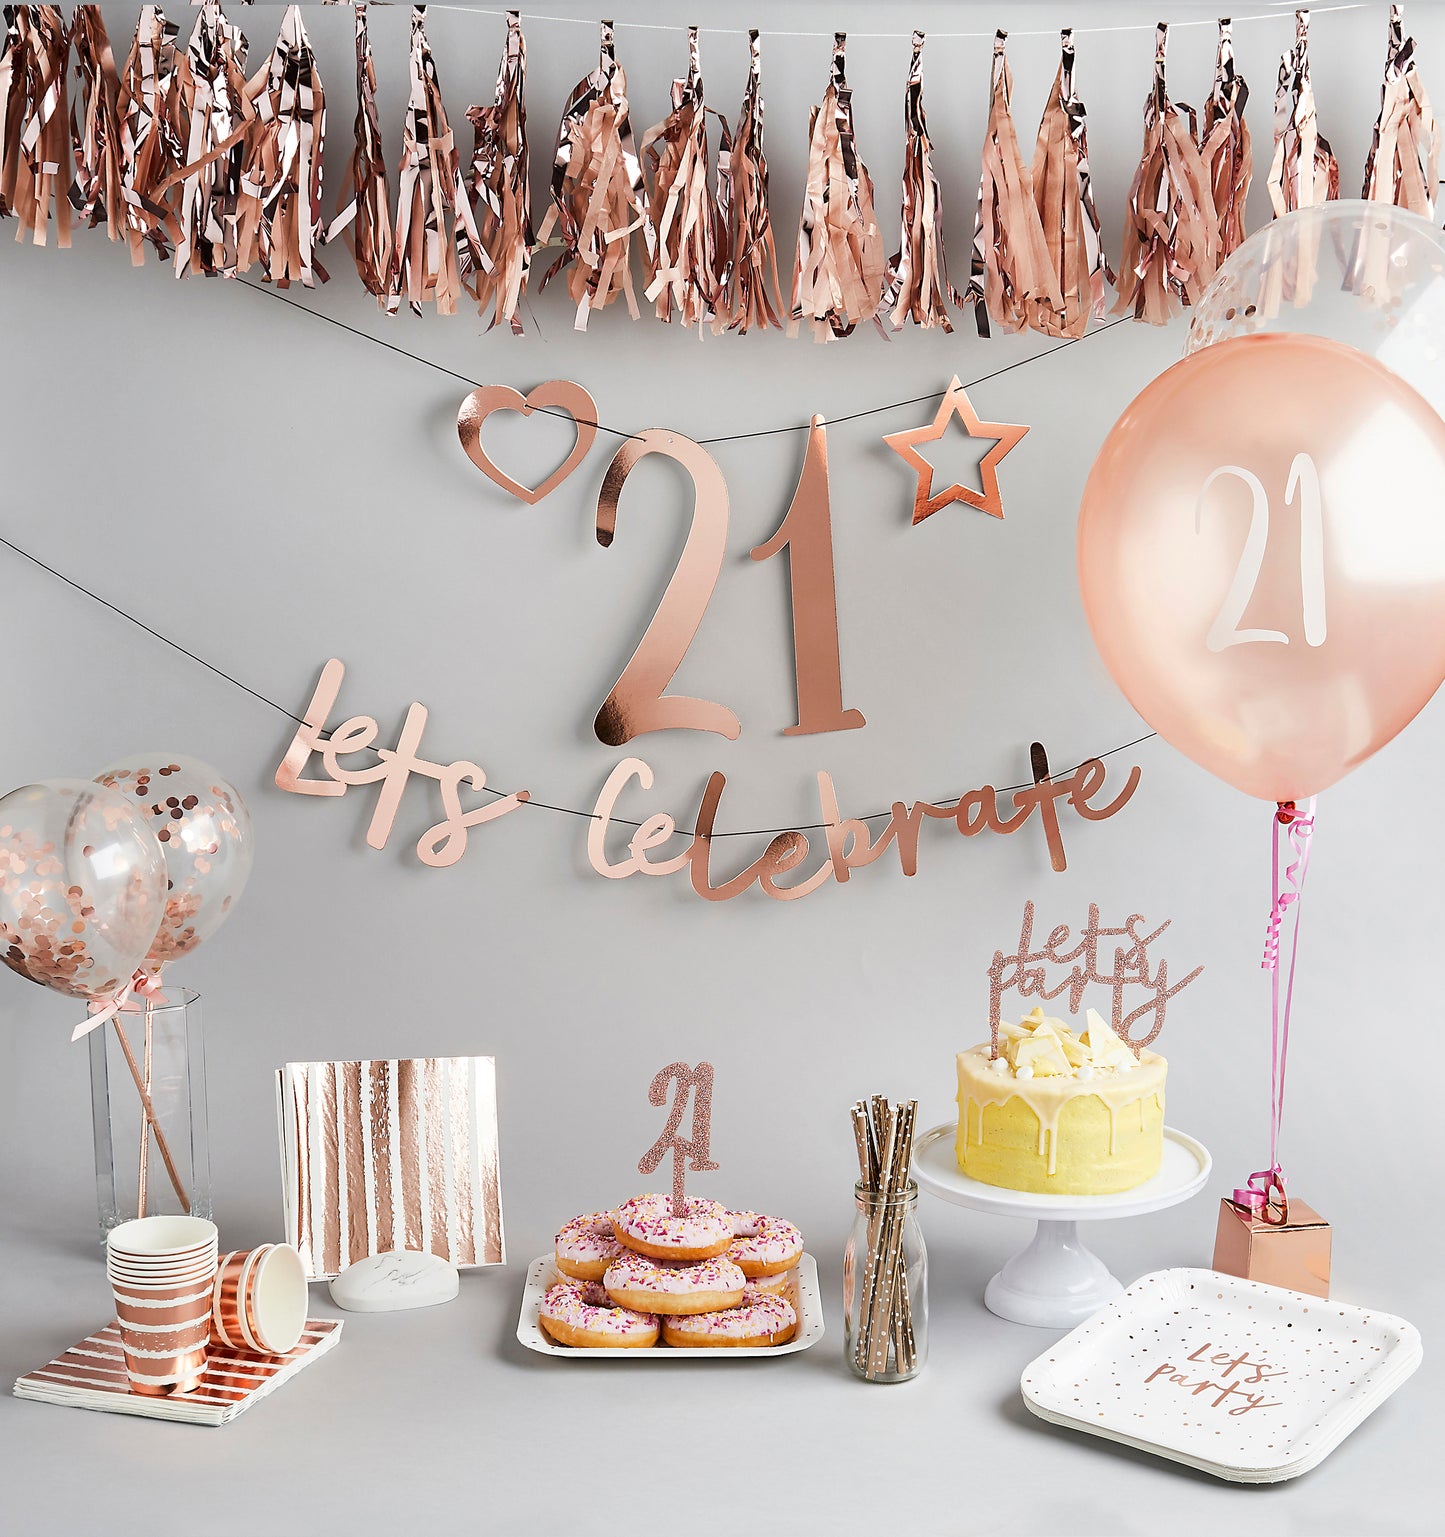 Hootyballoo 12 Pack Rose Gold Candles & Holders Birthday Celebration Partyware